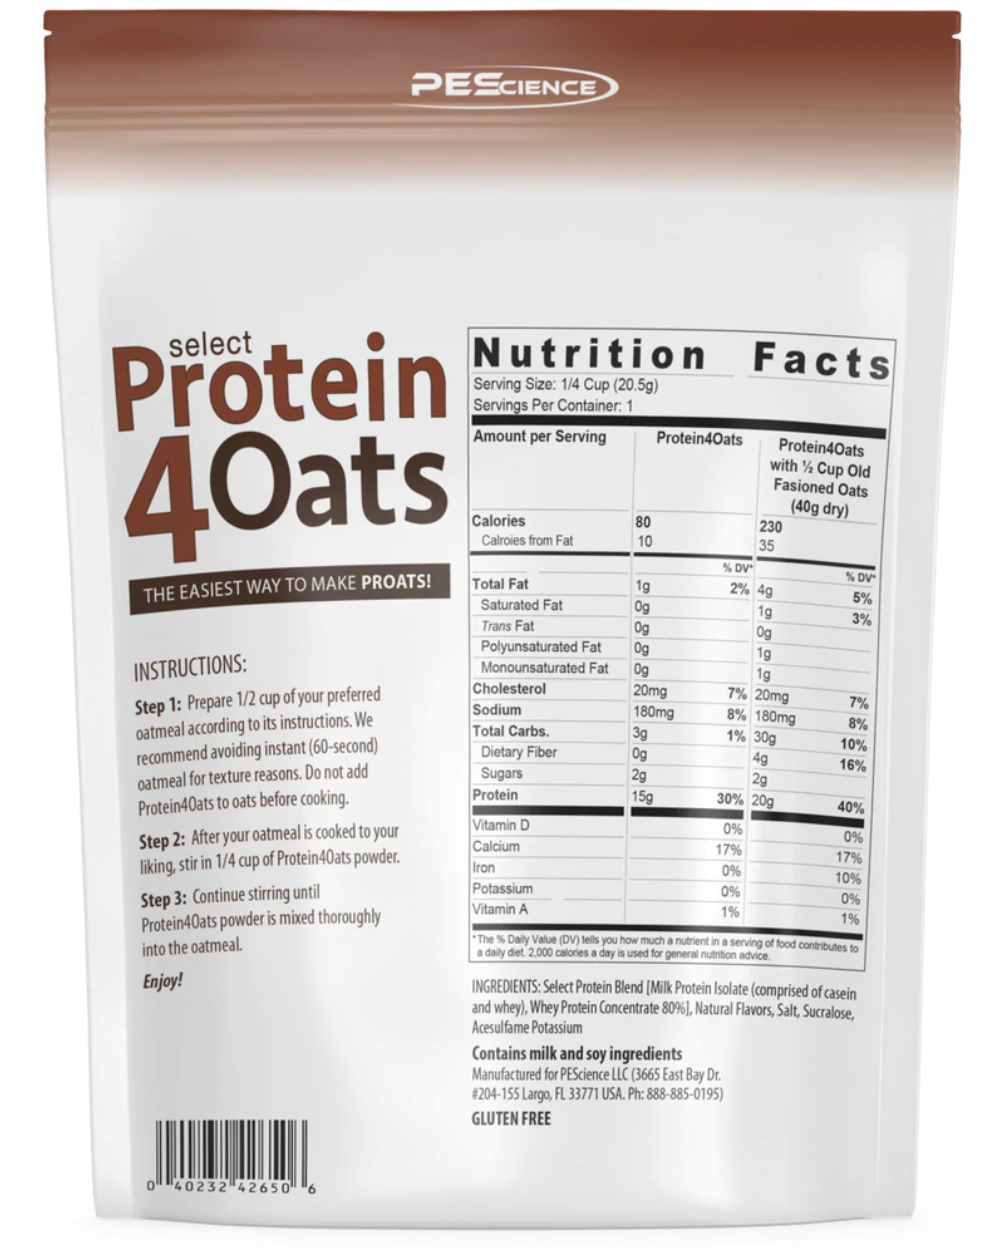 Protein 4 oats